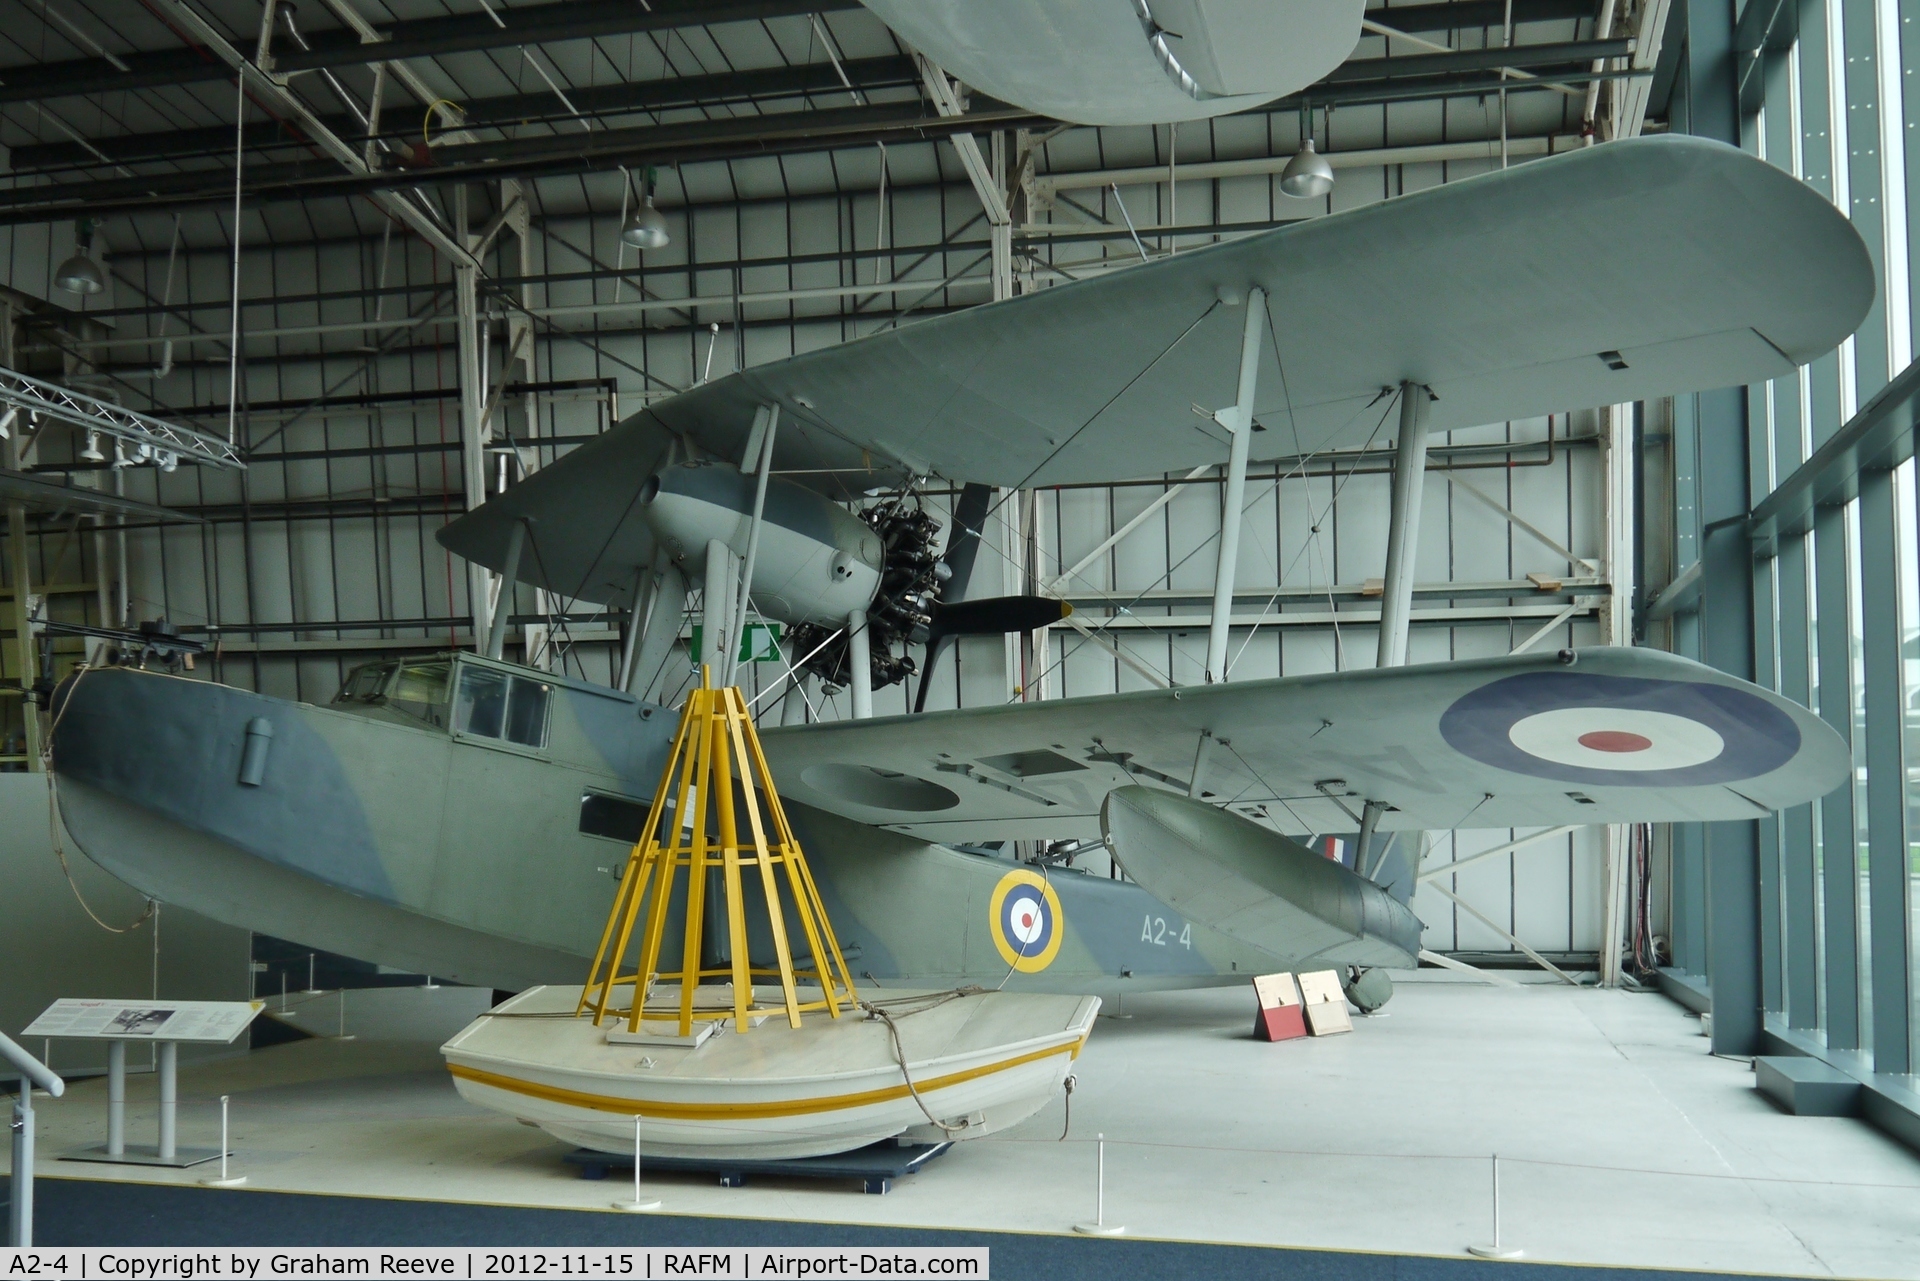 A2-4, Supermarine Seagull V C/N Not found A2-4/VH-ALB, On display at the Royal Air Force Museum, Hendon.